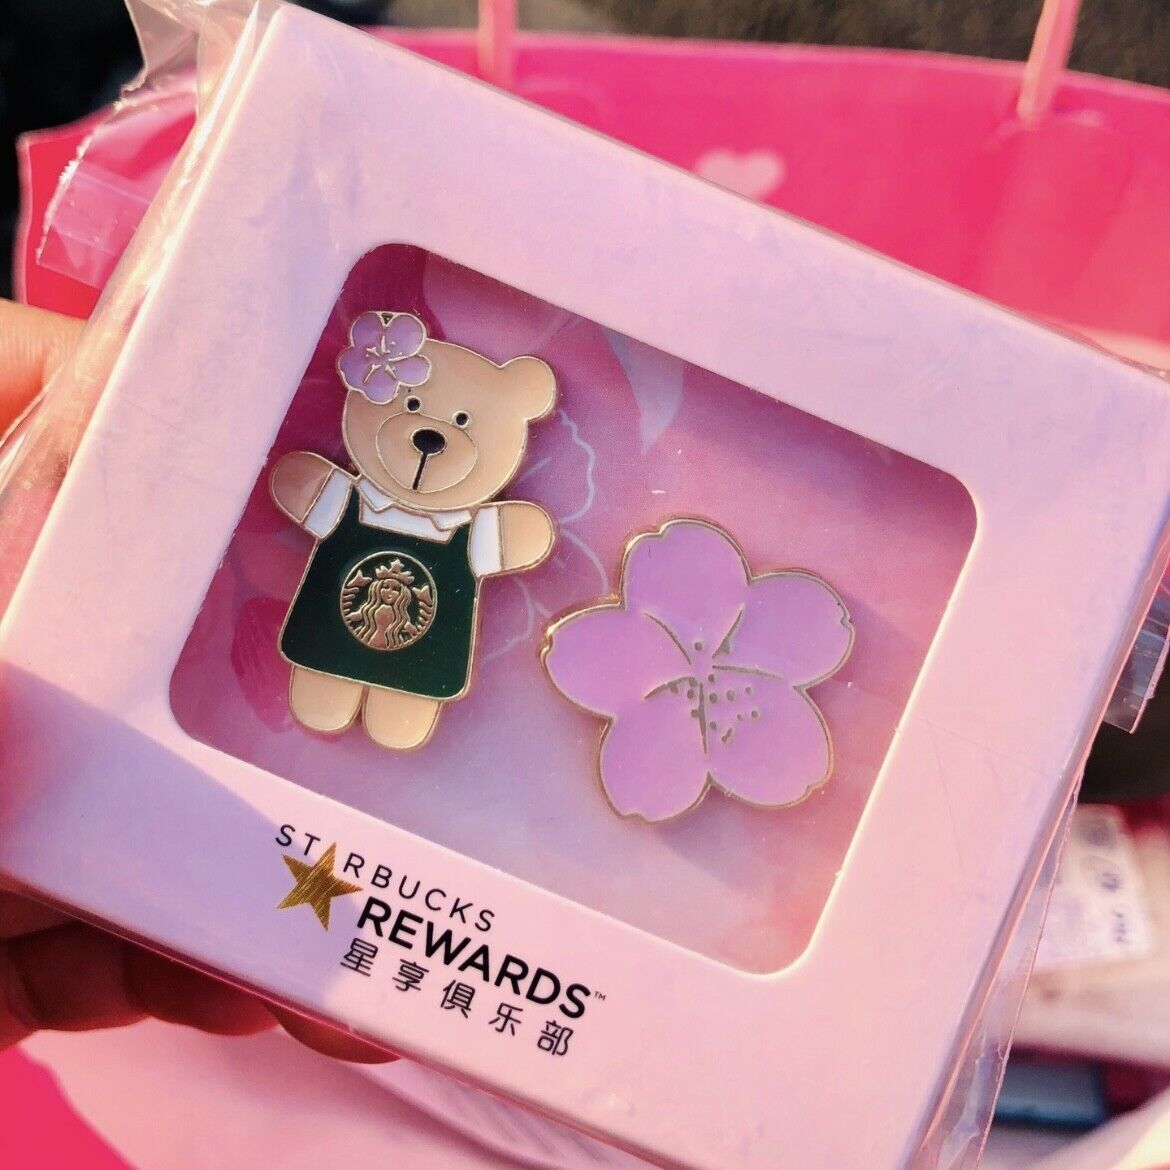 Starbucks China 2019 Coffee Cherry blossom and bear 2 pins set Limited Edition